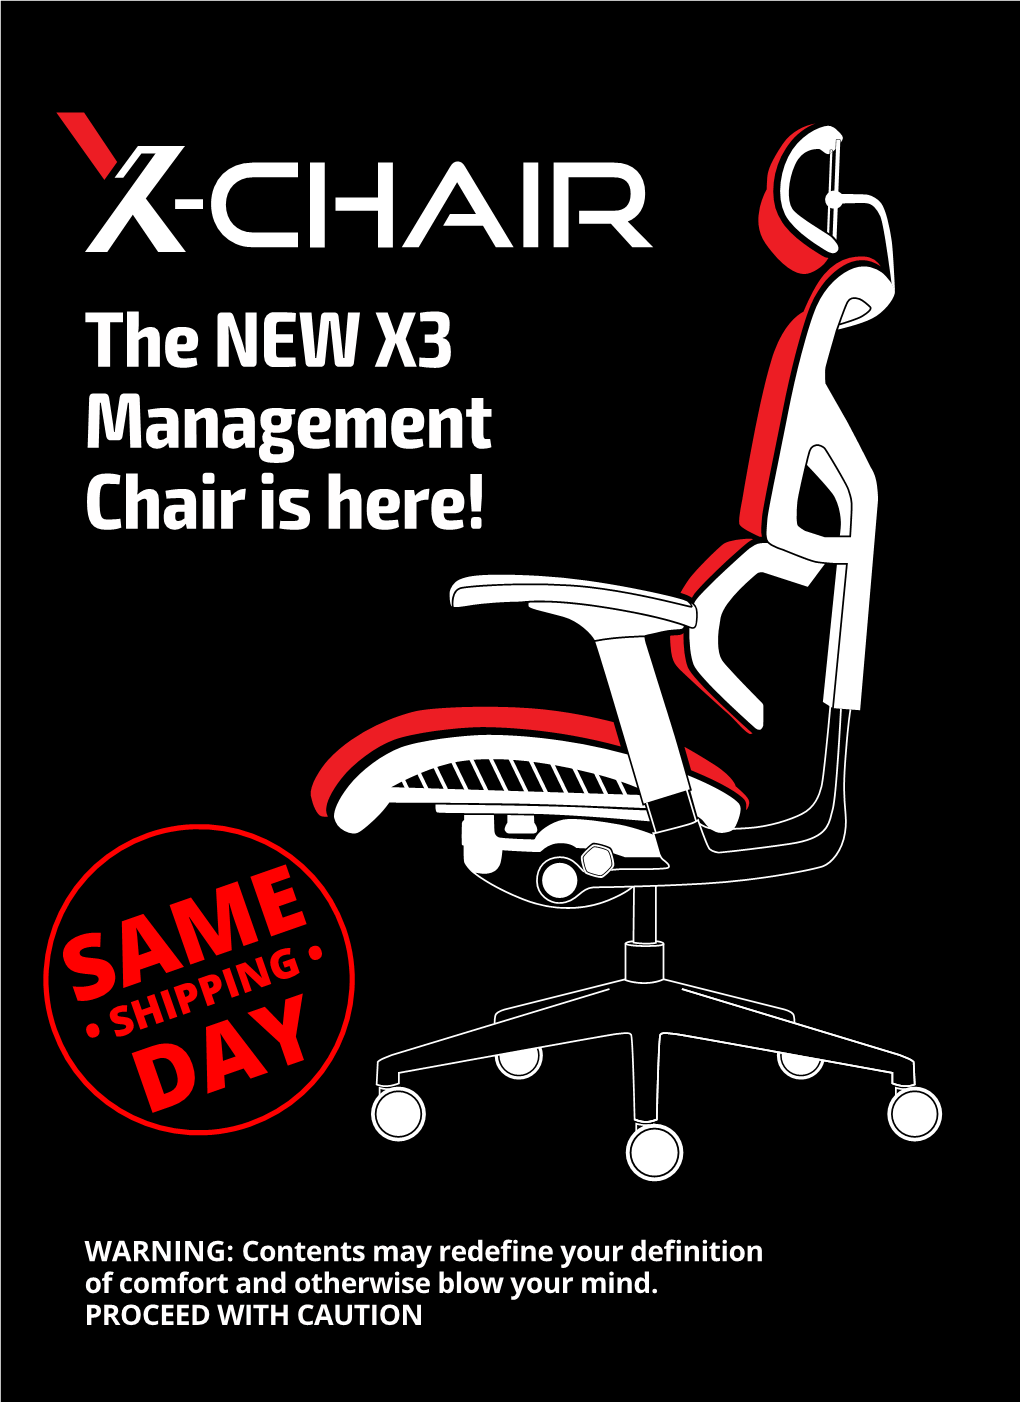 The NEW X3 Management Chair Is Here!